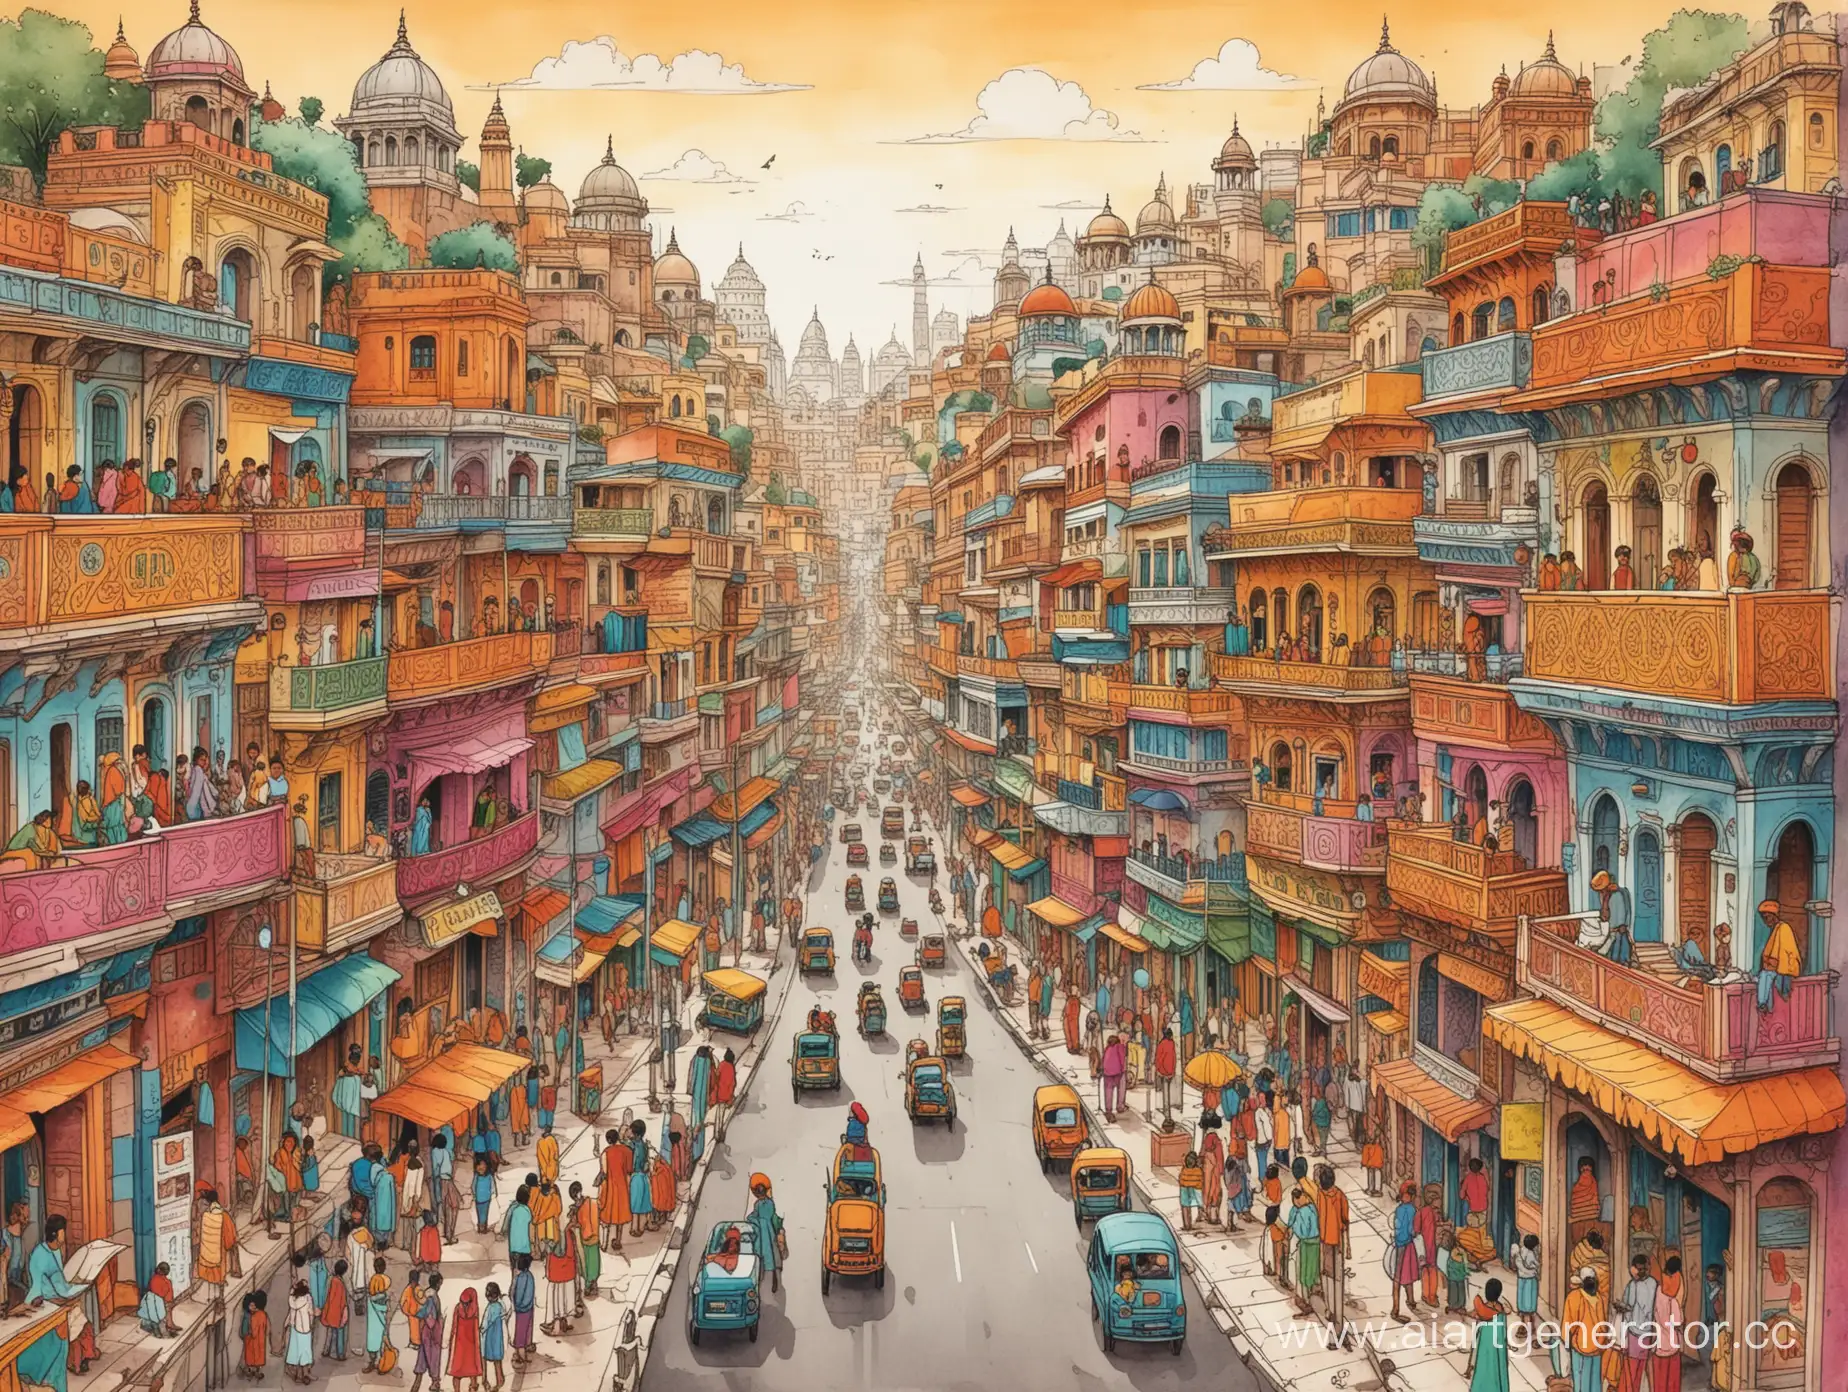 Vibrant-Delhi-Cityscape-Illustration-of-Colorful-National-Patterns-and-Street-Scenes